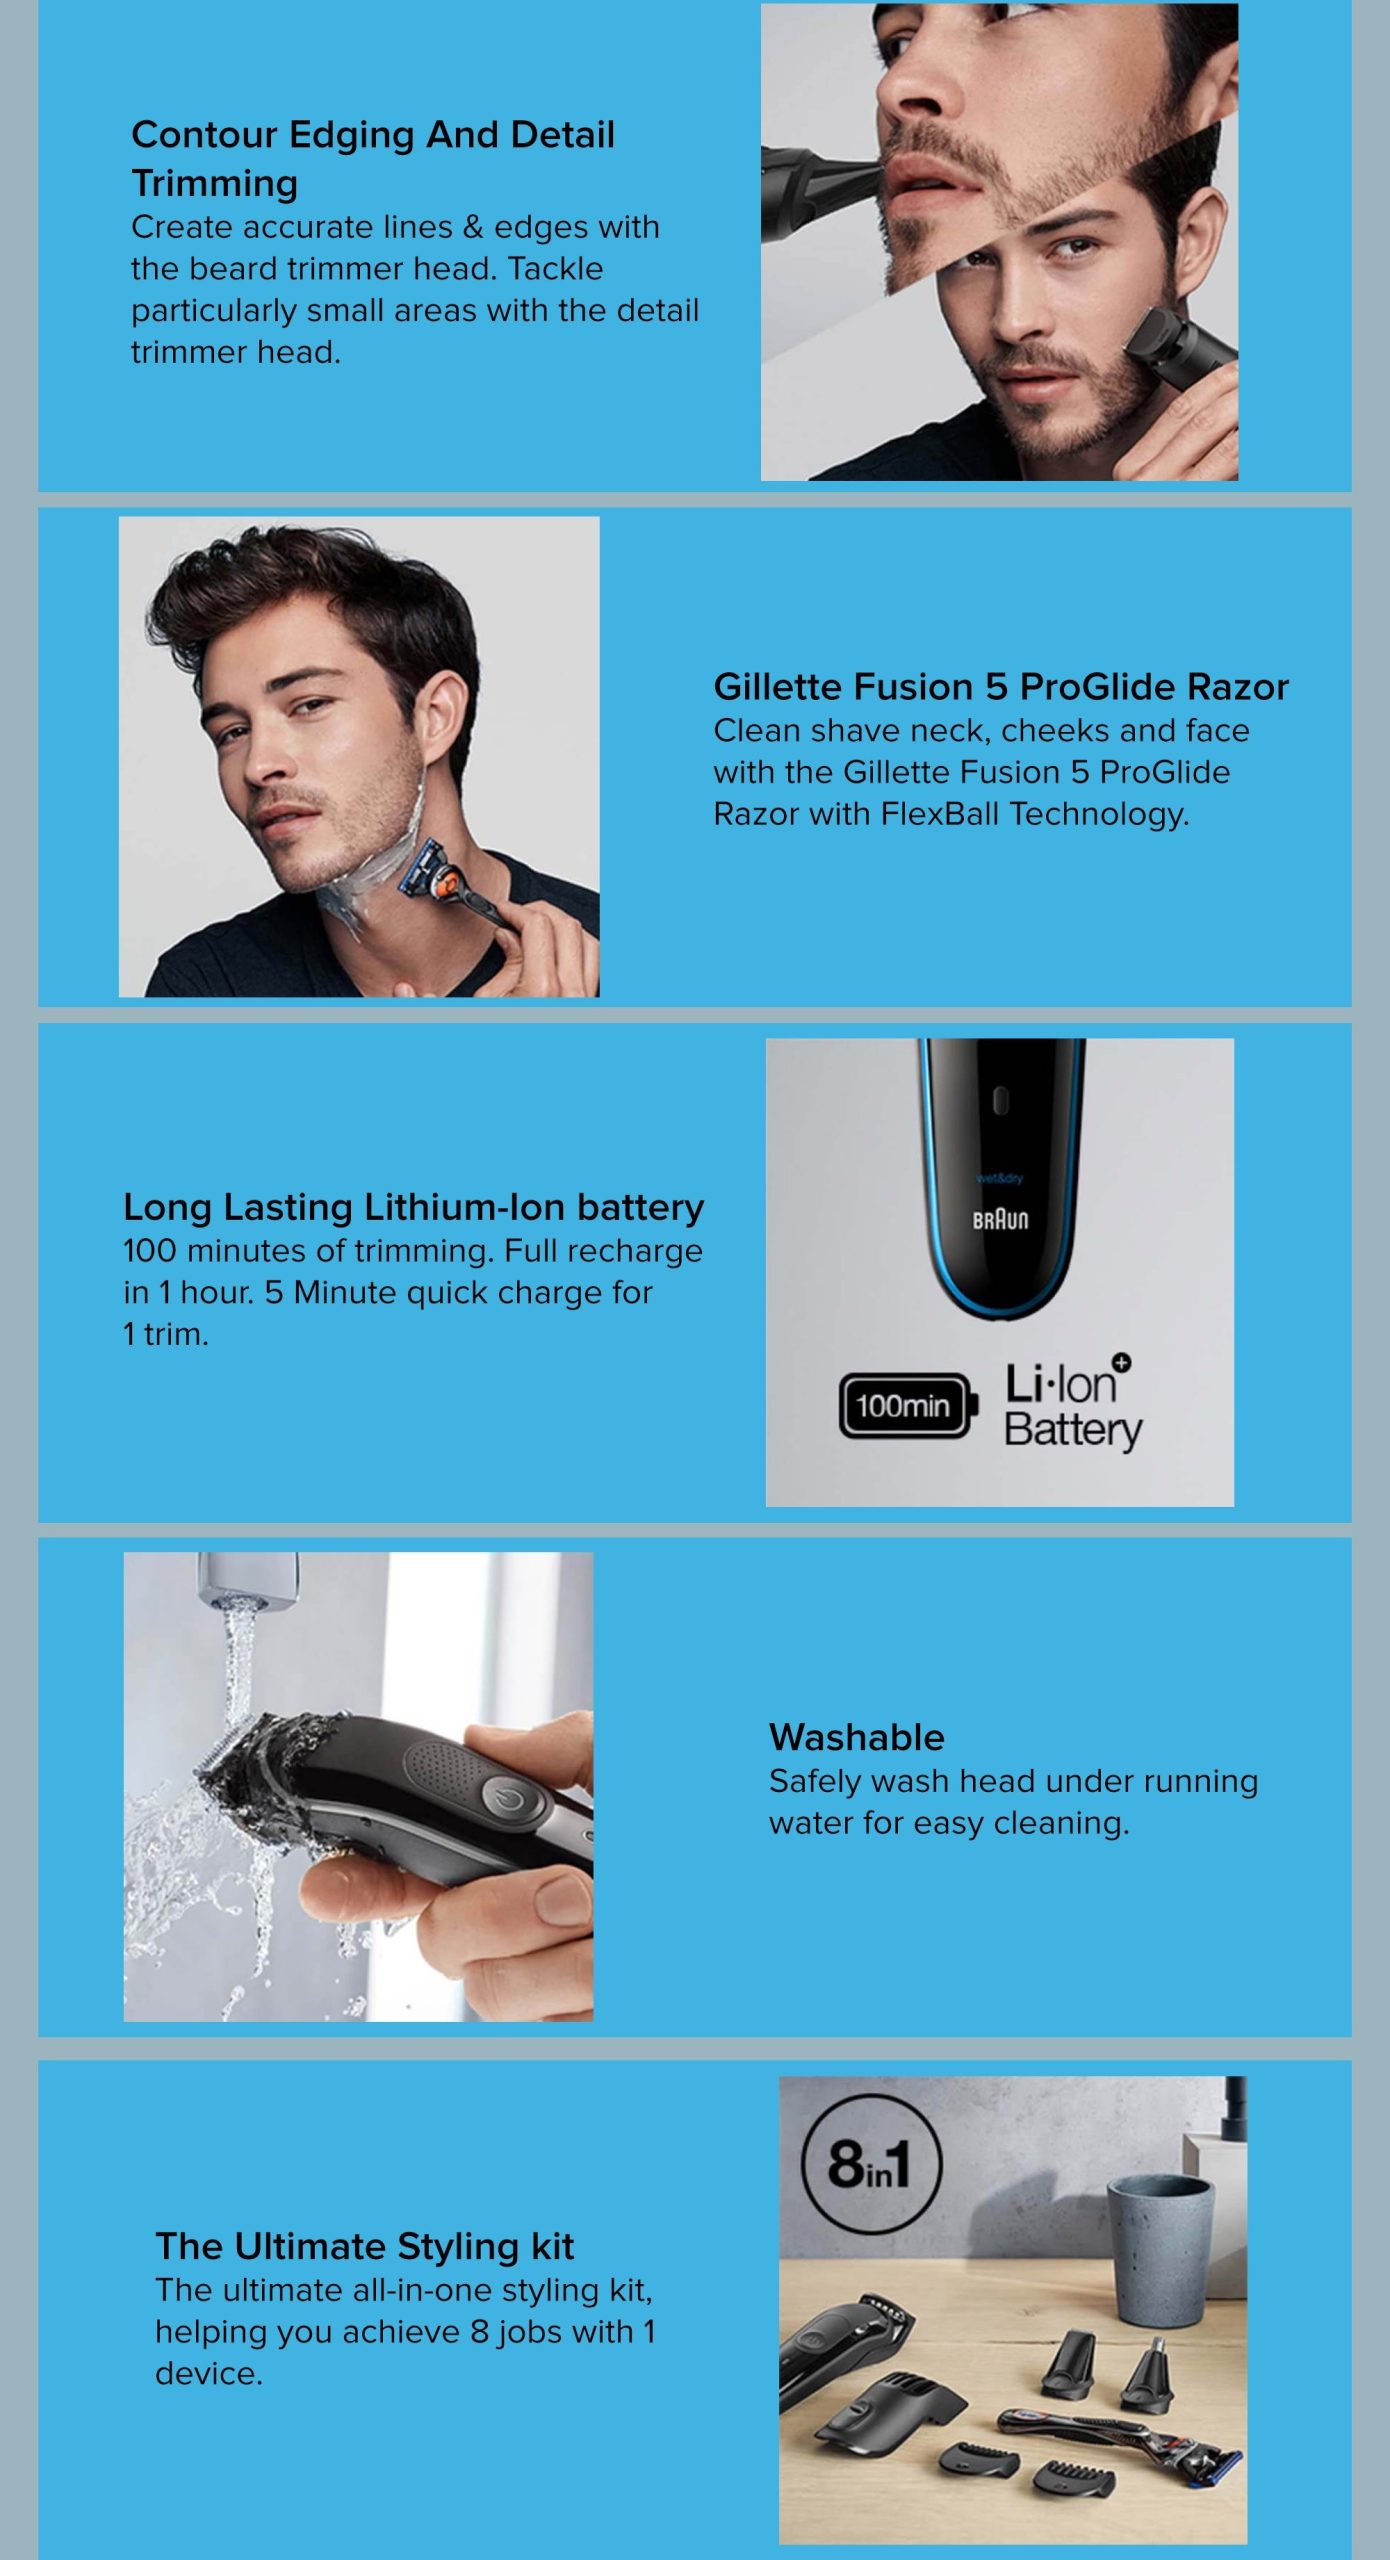 PLUGnPOINT for trimmer UAE Buy MGK5260 in Men | Braun